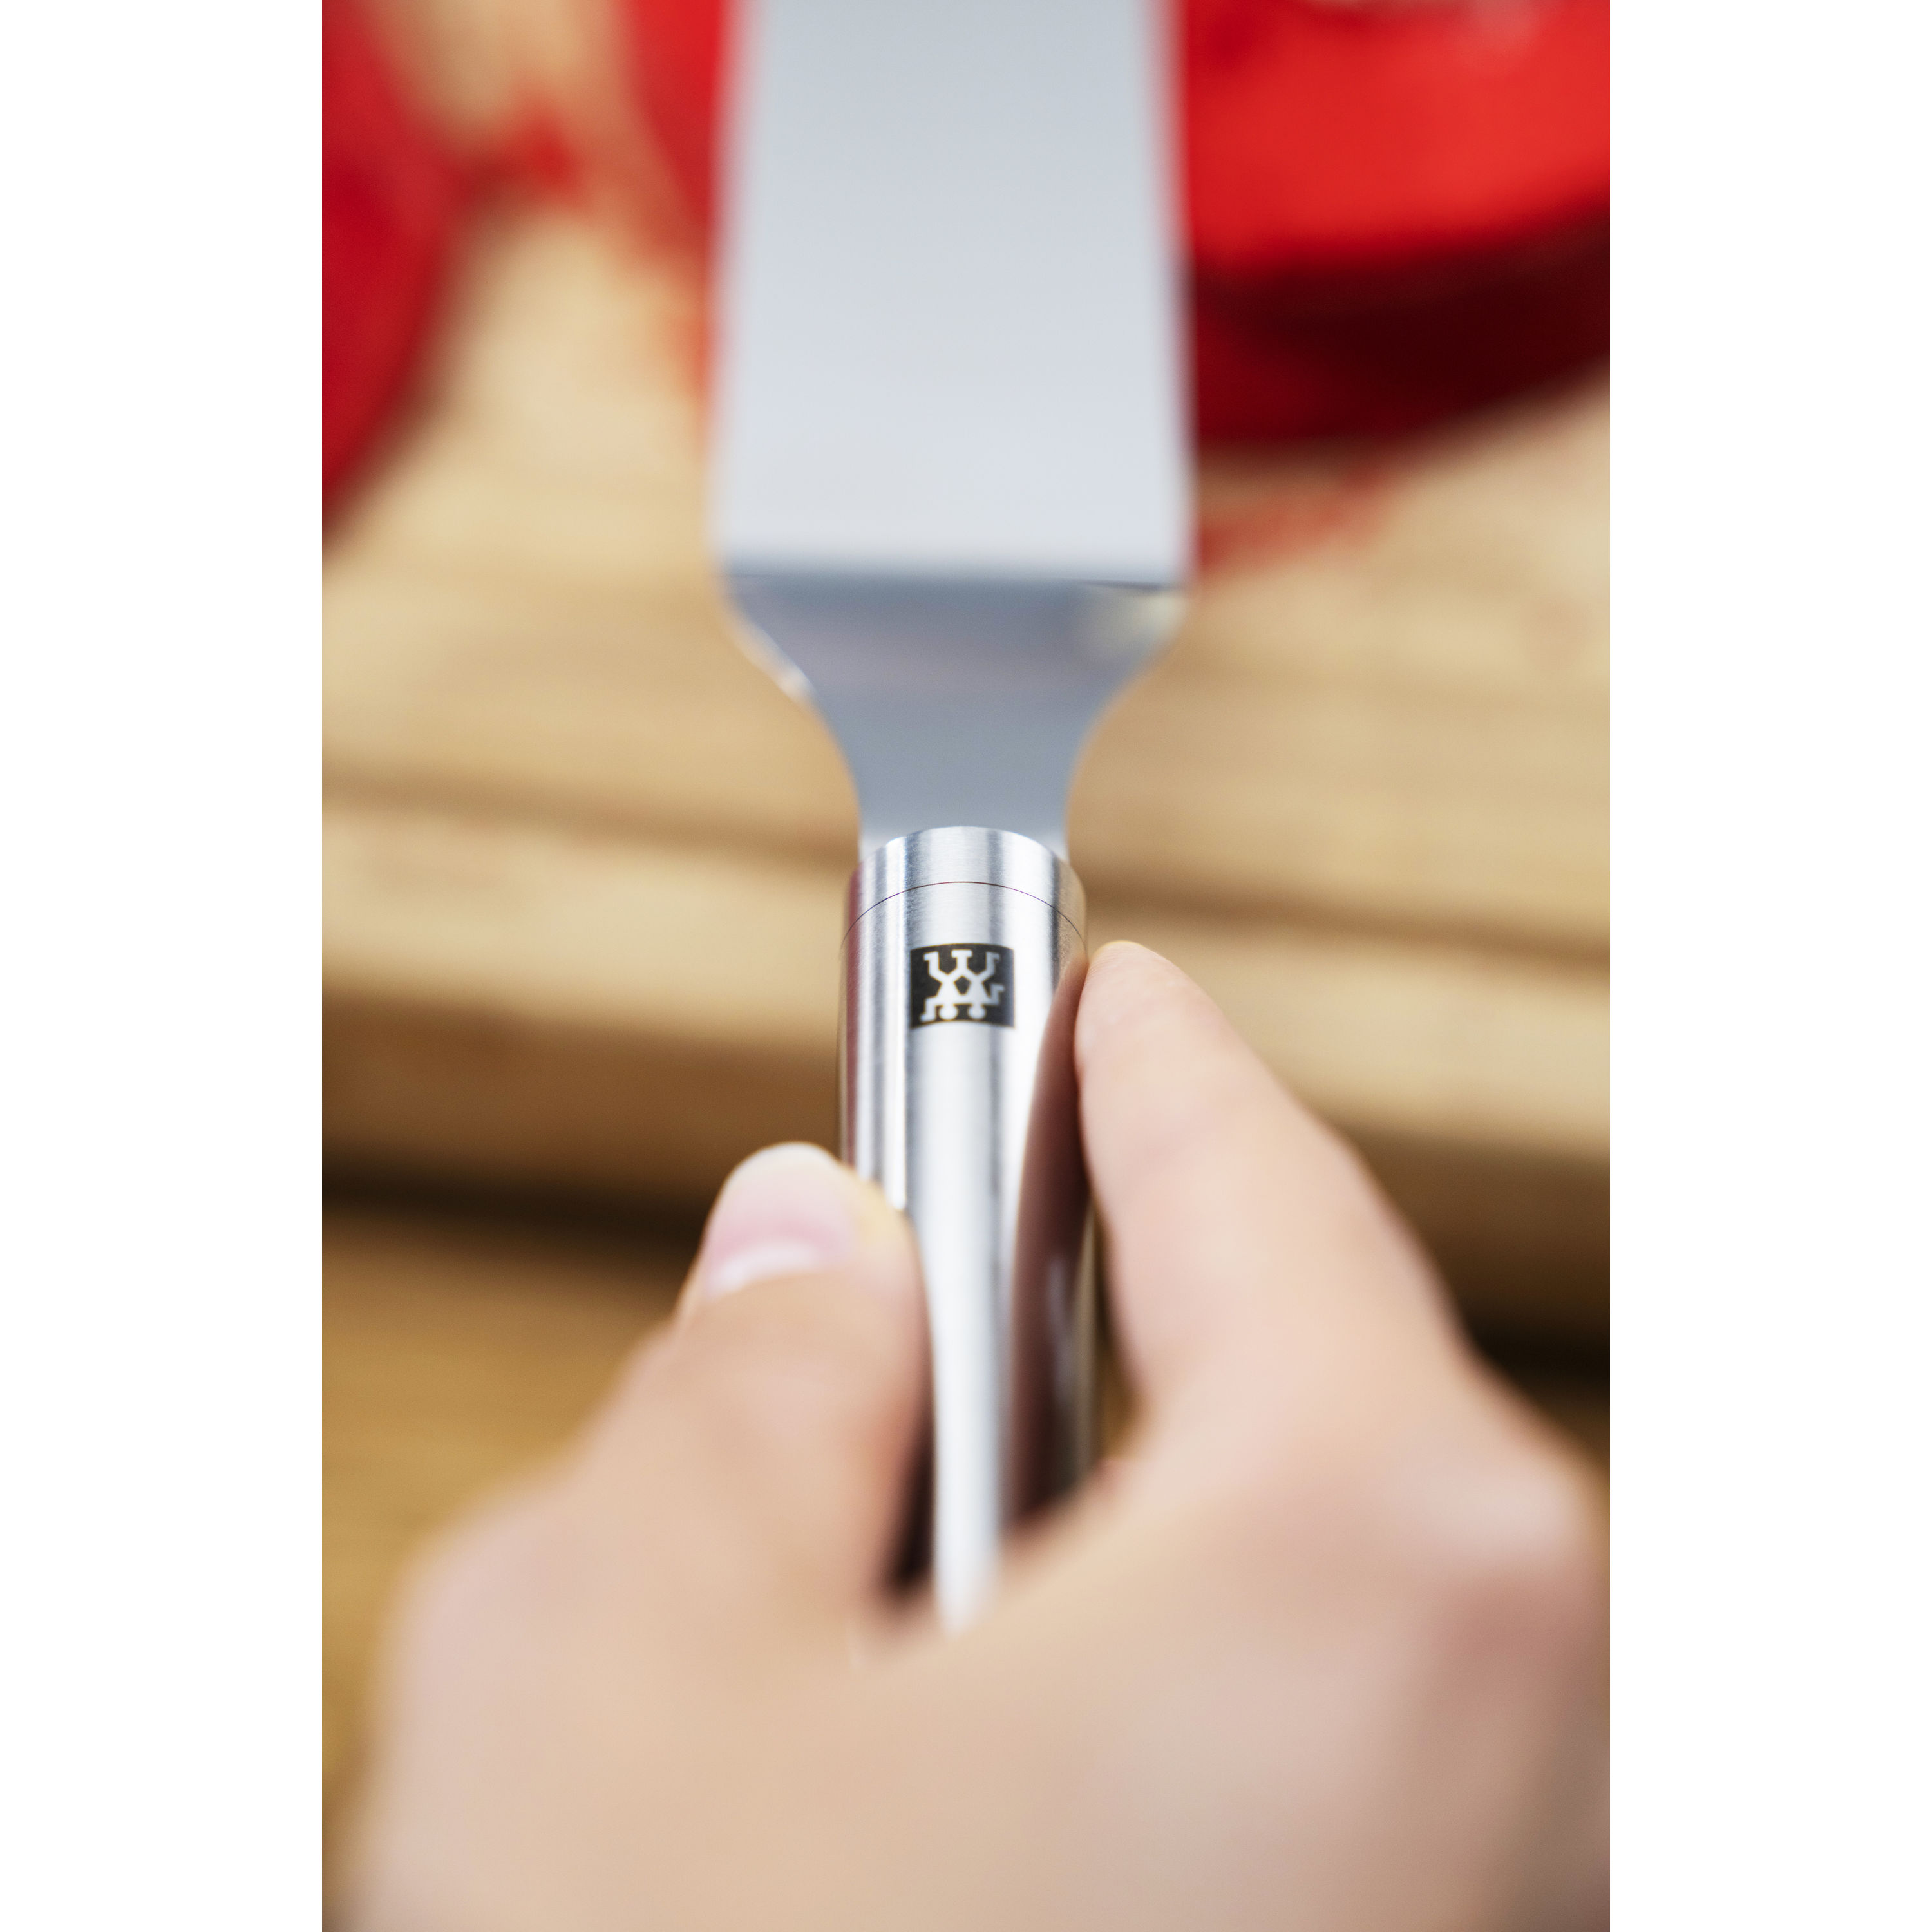 Pastry spatula, stainless steel, 40 cm, <<ZWILLING Pro